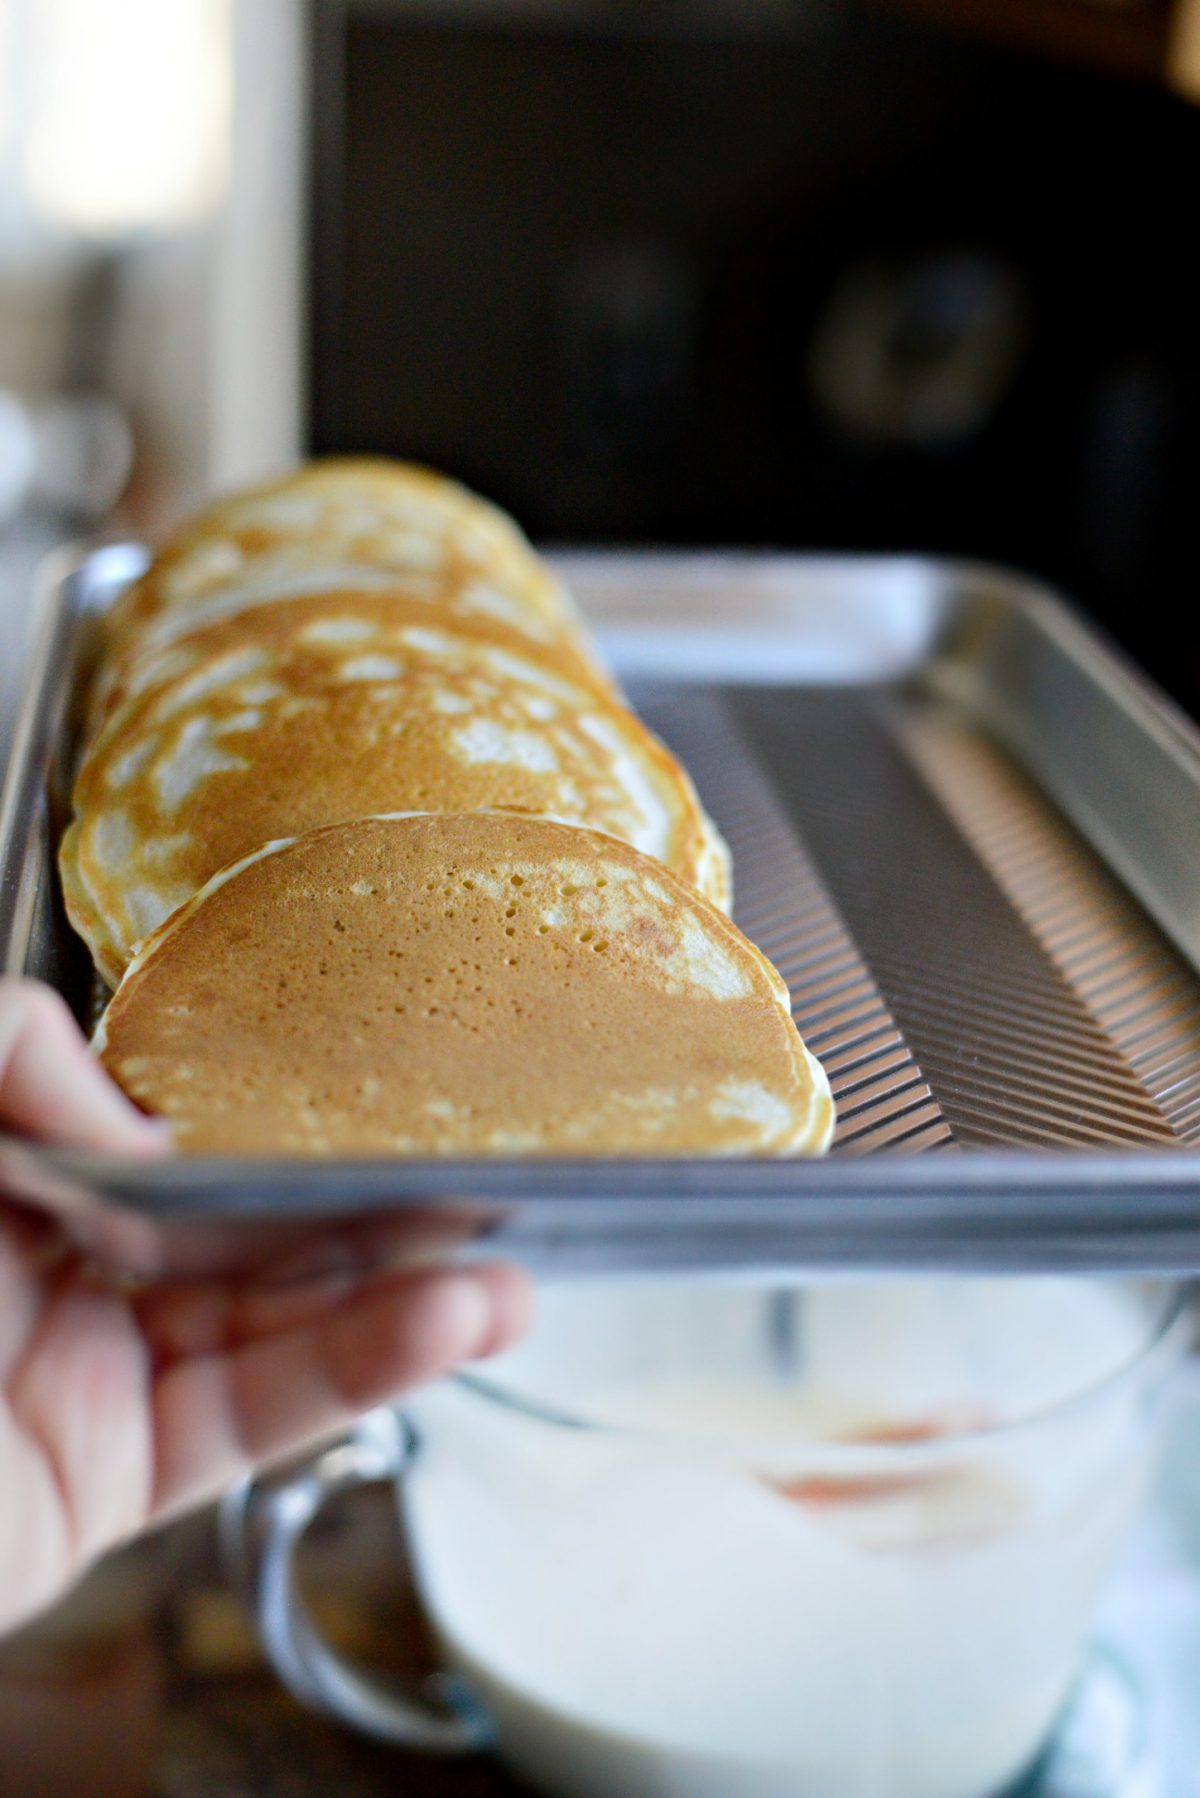 transfer pancakes to rimmed baking pan and keep warm in a low oven.